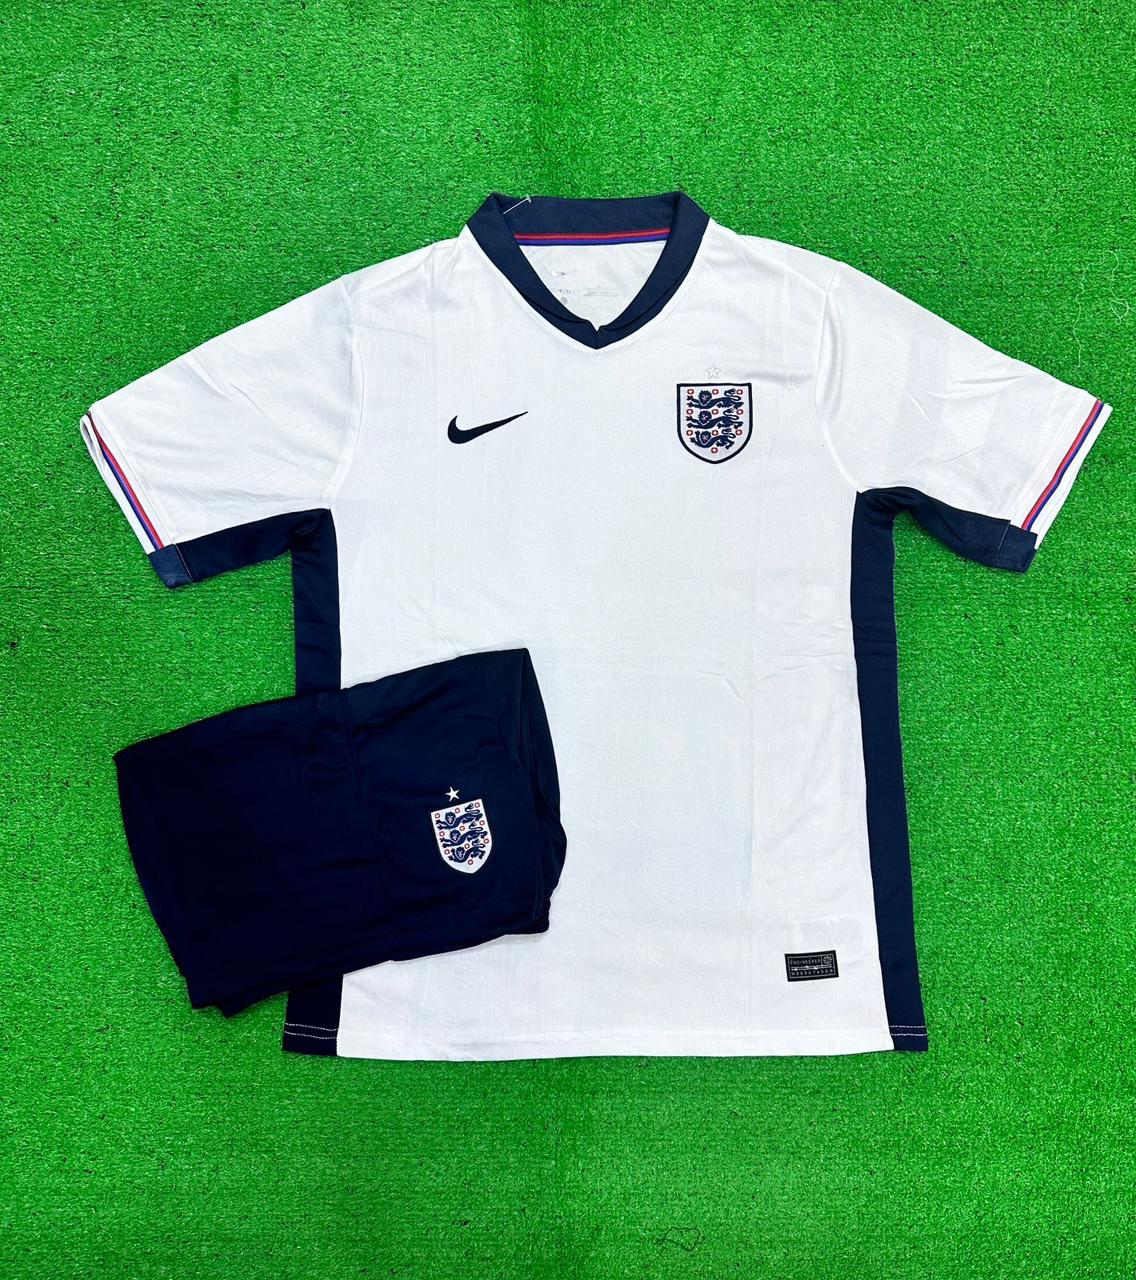 ENGLAND HOME JERSEY WITH SHORTS